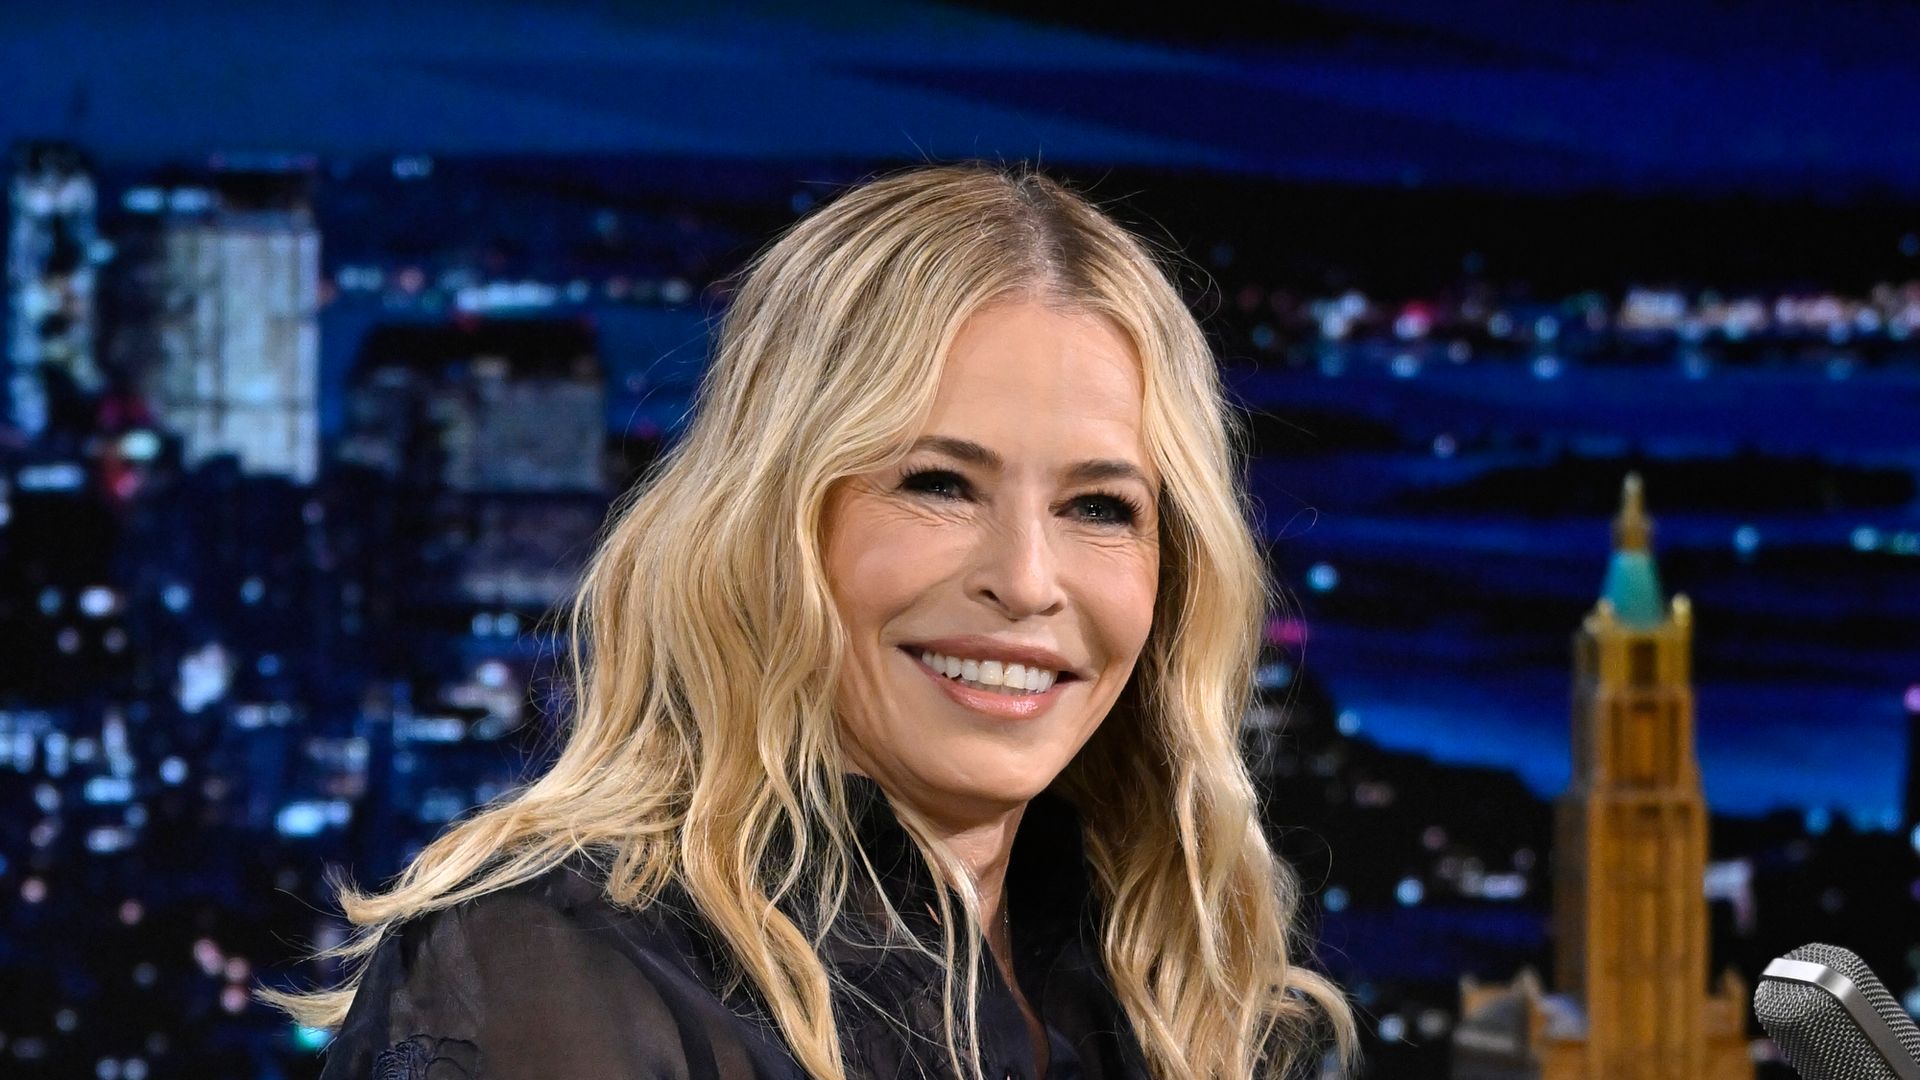 Chelsea Handler’s surprising confession about Robert De Niro leaves Jimmy Fallon red-faced